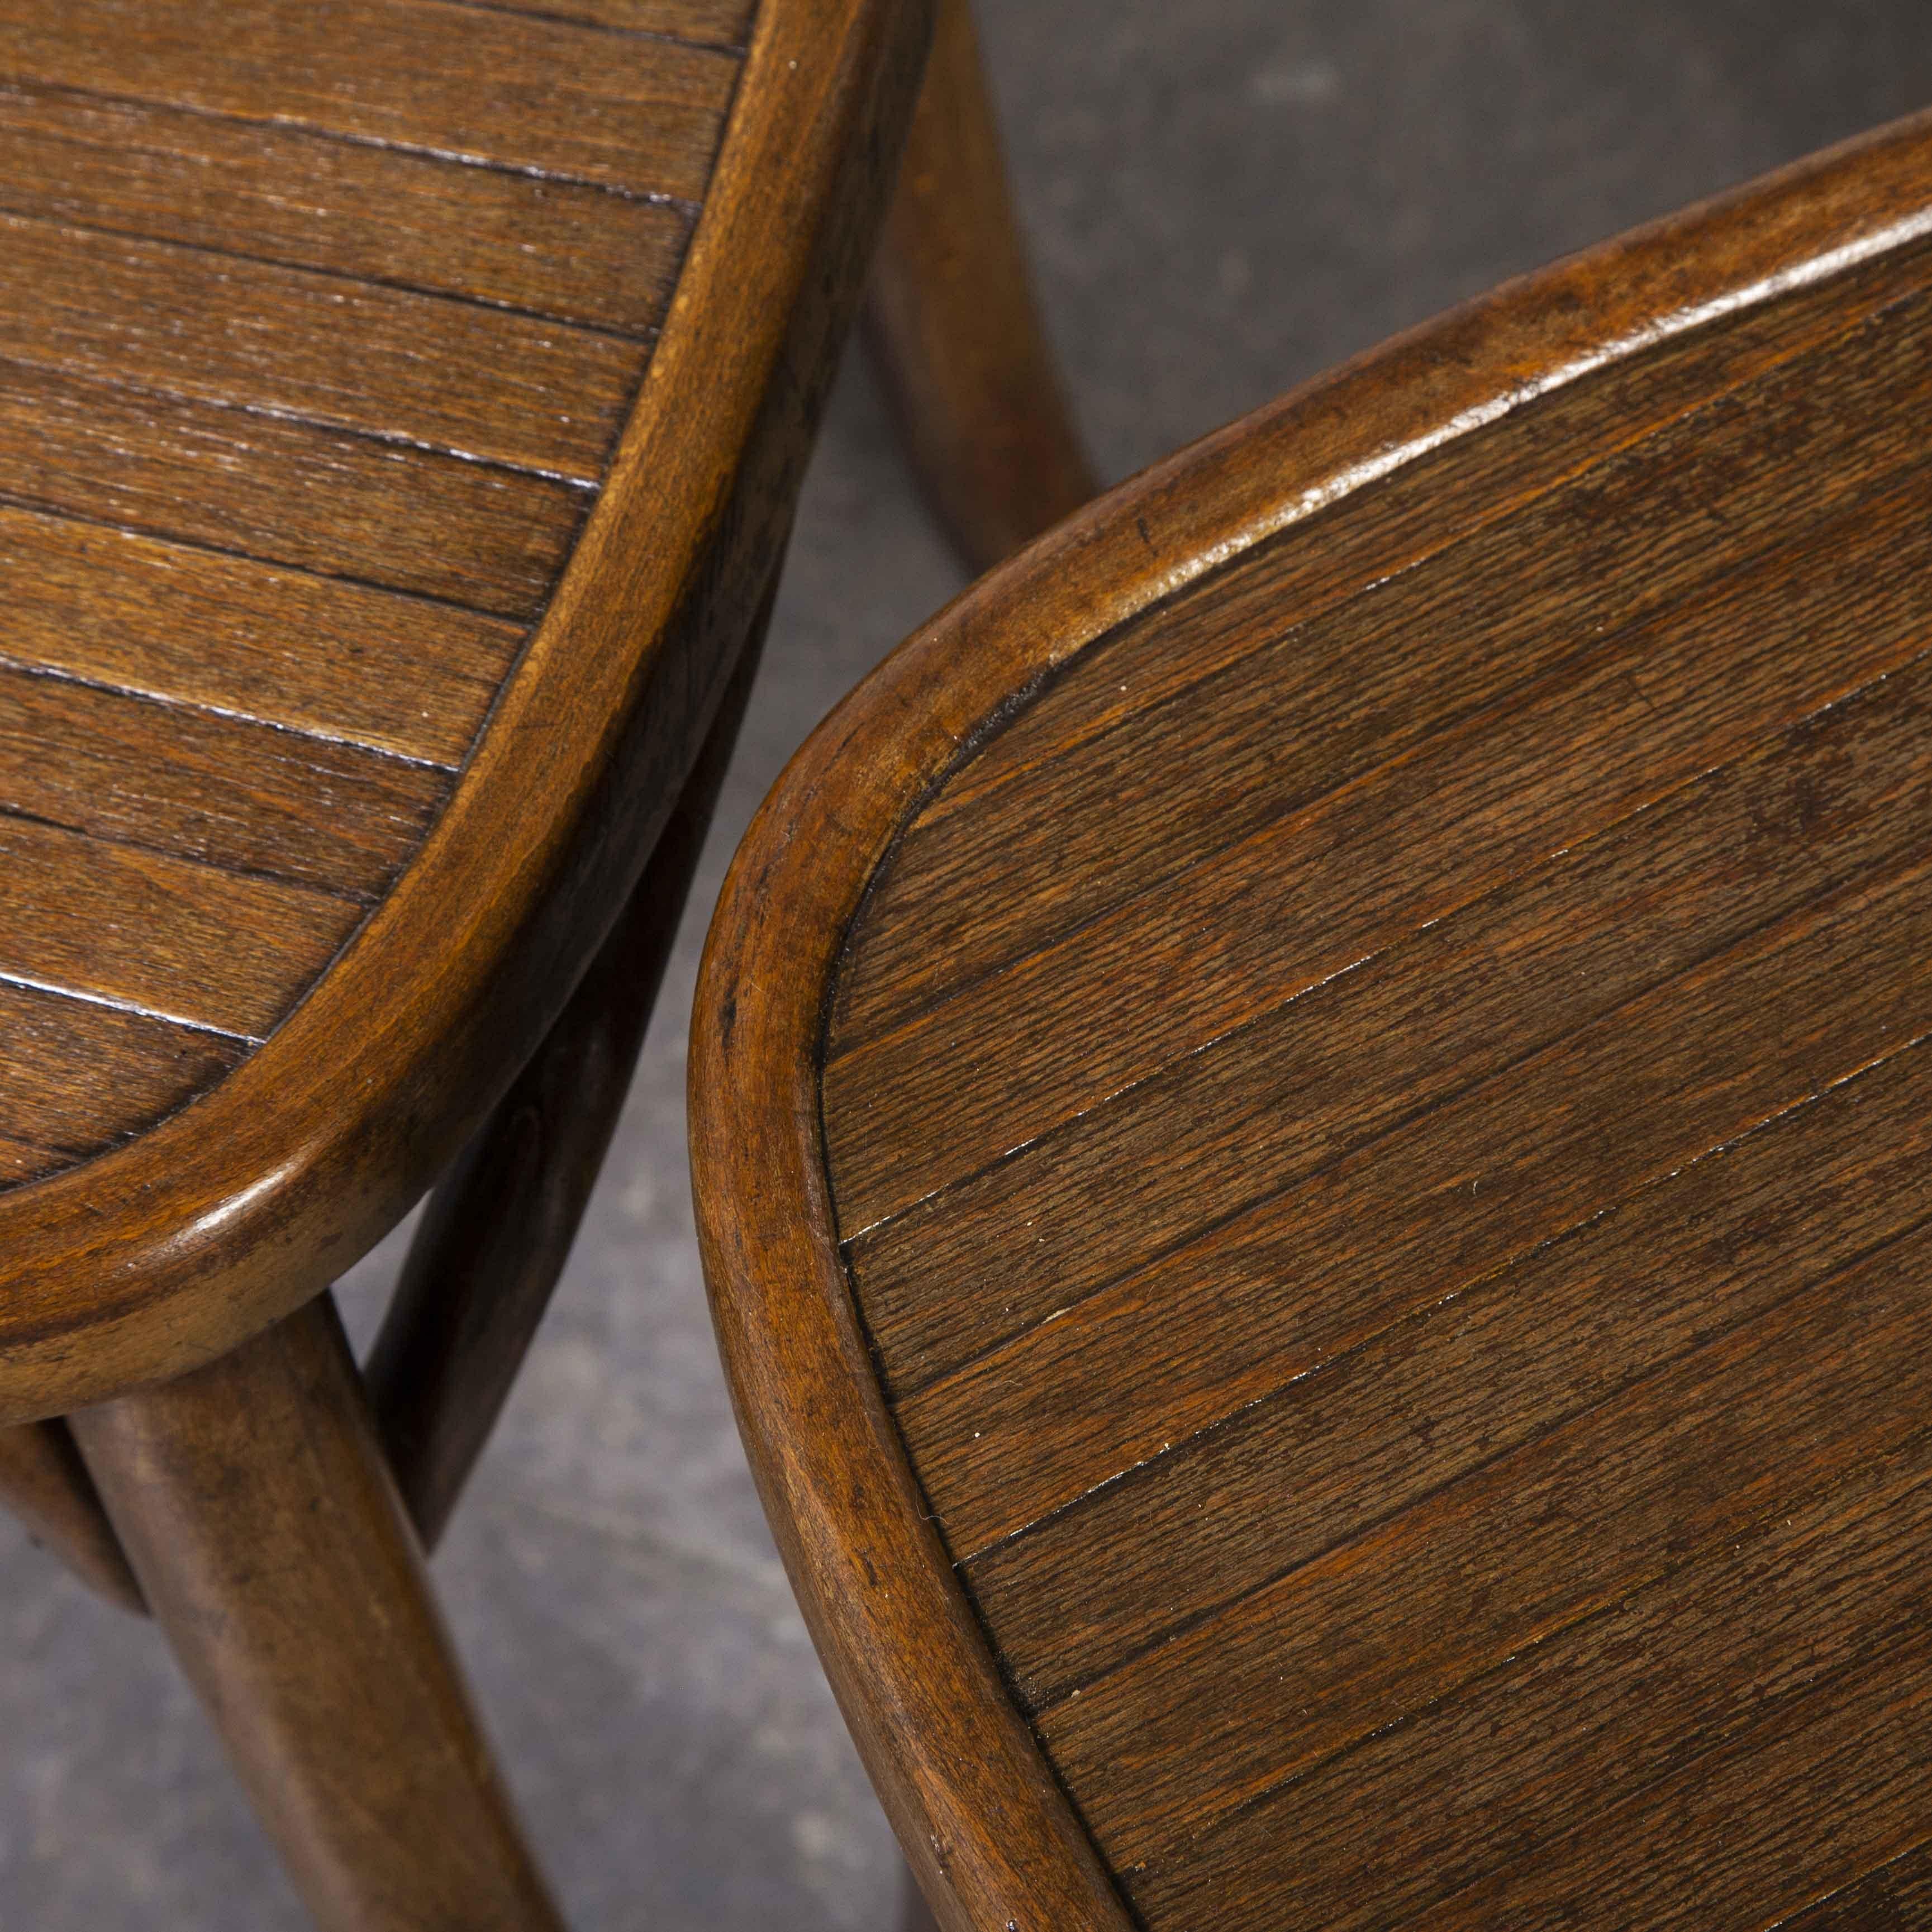 1950’s Pair of bentwood dining chairs – Dark walnut

1950’s Pair of bentwood dining chairs – Dark walnut. The process of steam bending beech to create elegant chairs was discovered and developed by Thonet, but when its patents expired in 1869 many